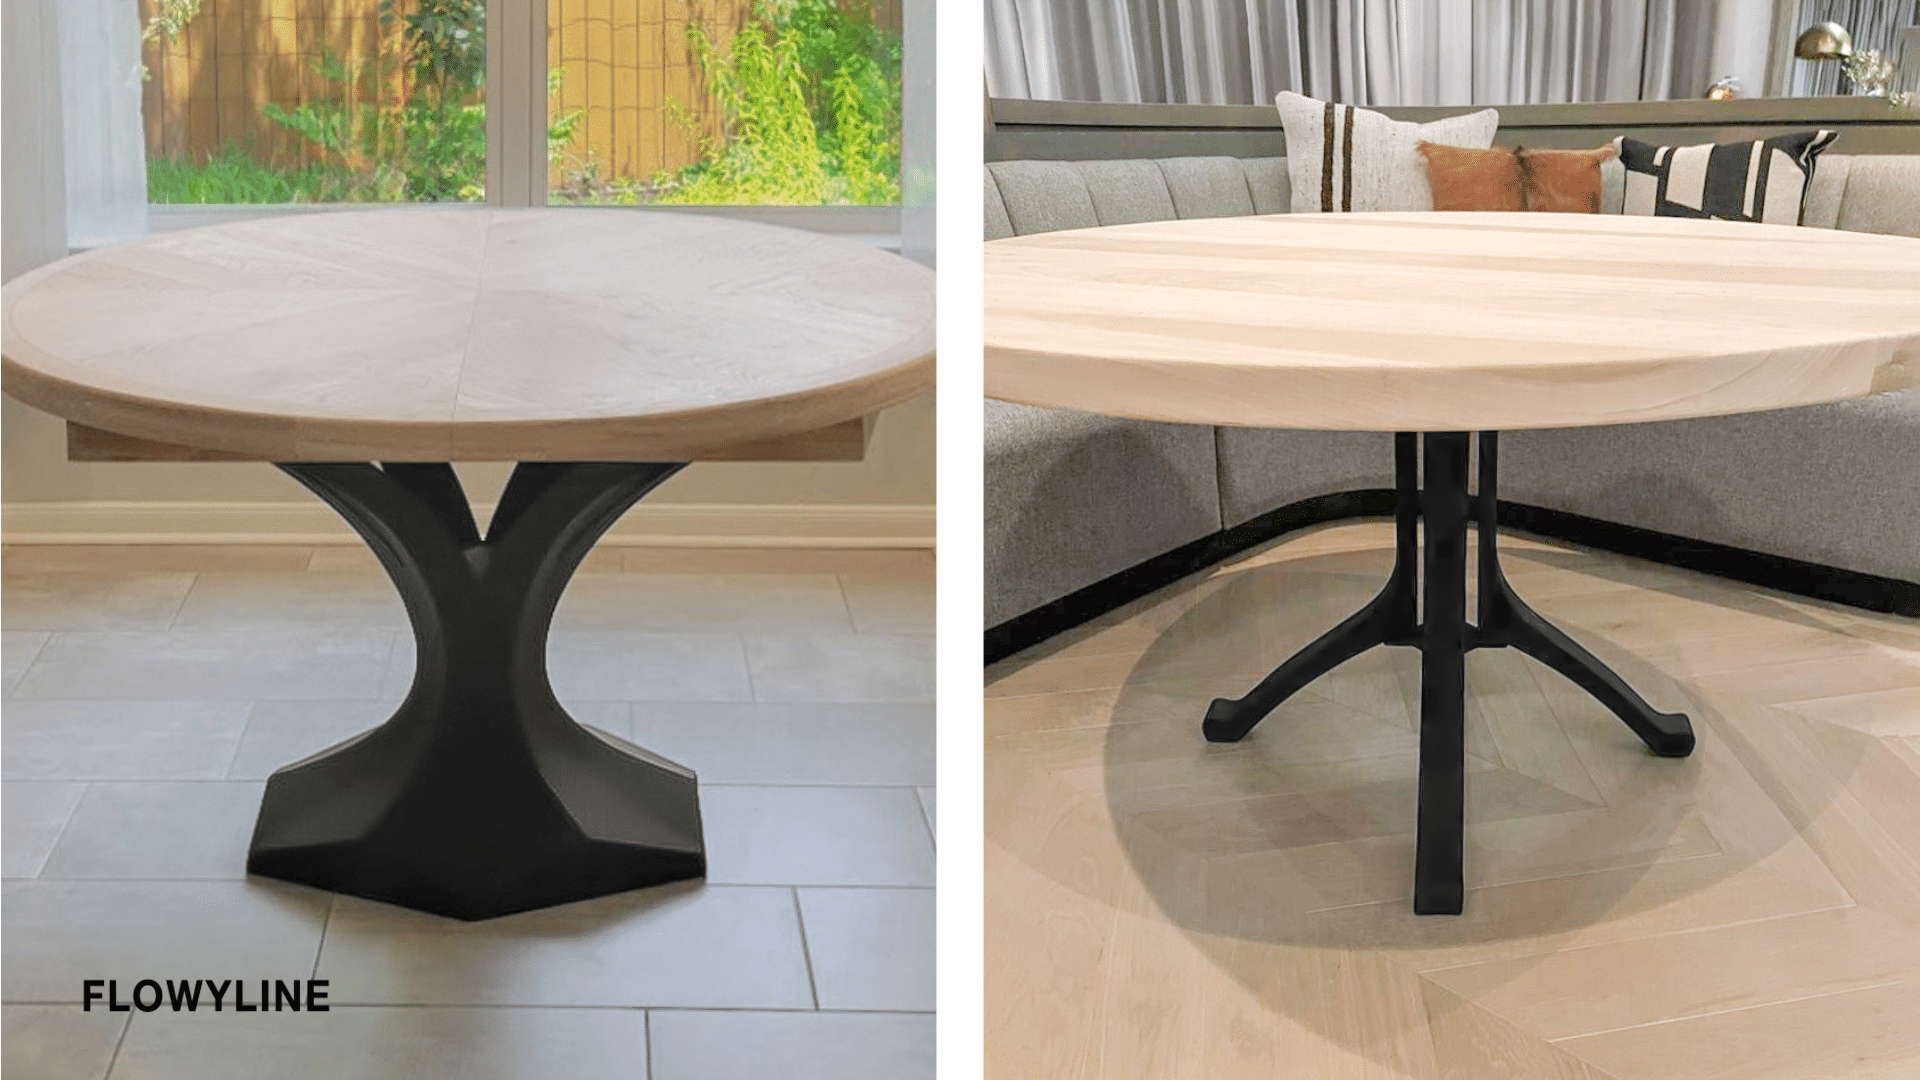 Determining the purpose of the table helps you choose the right metal table base